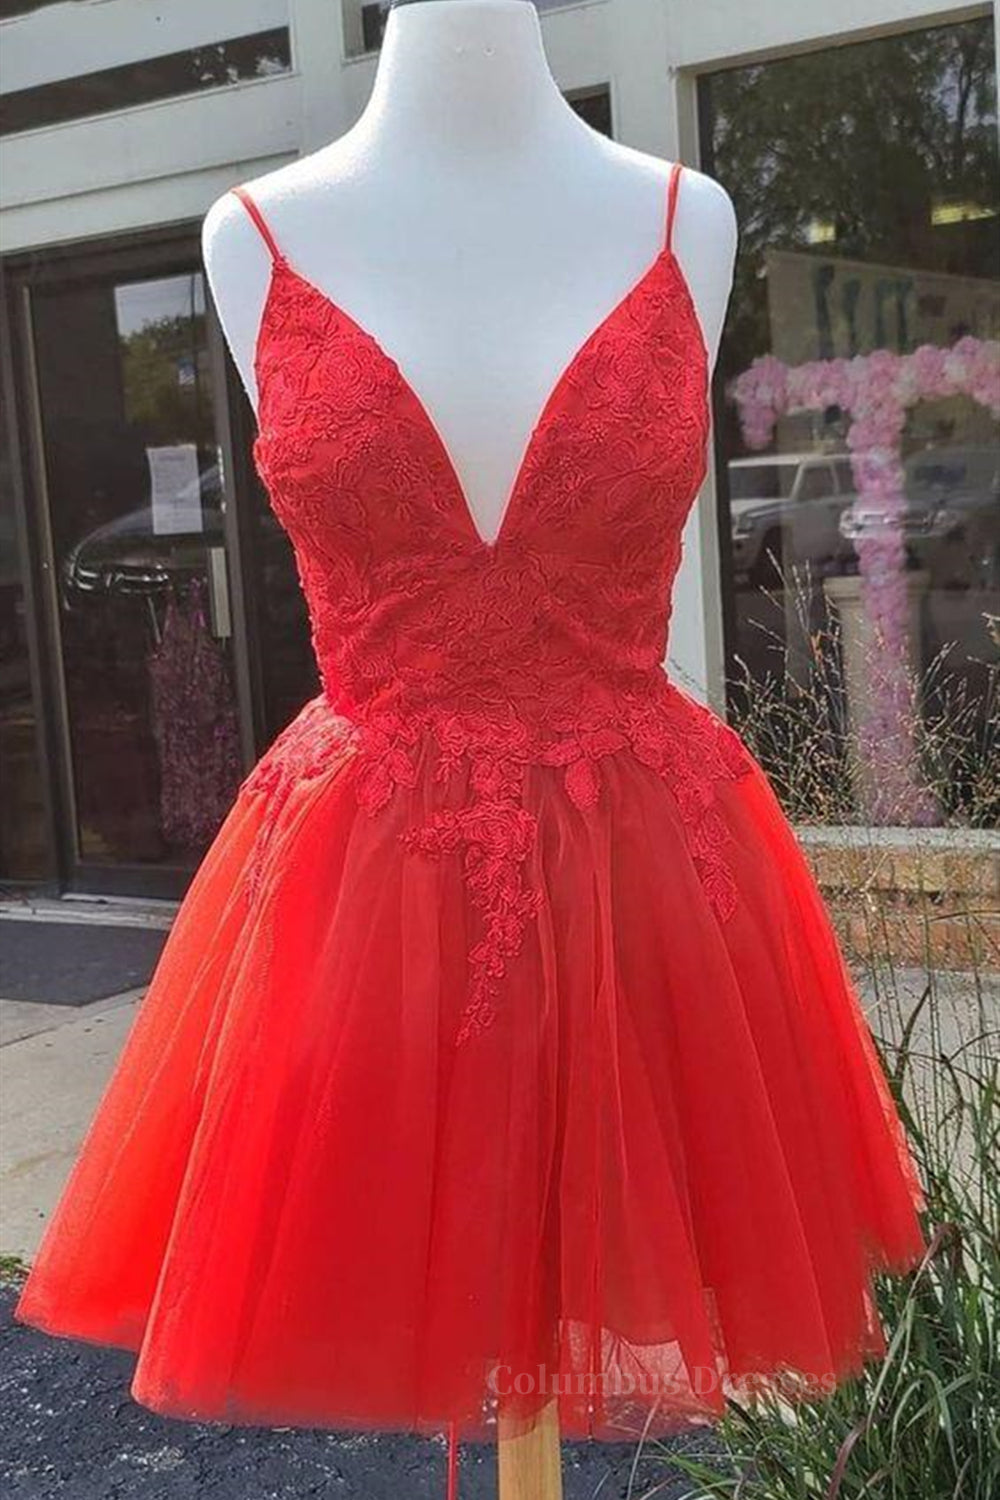 White Prom Dress, A Line V Neck Red Lace Short Prom Dress, Red Lace Homecoming Dress